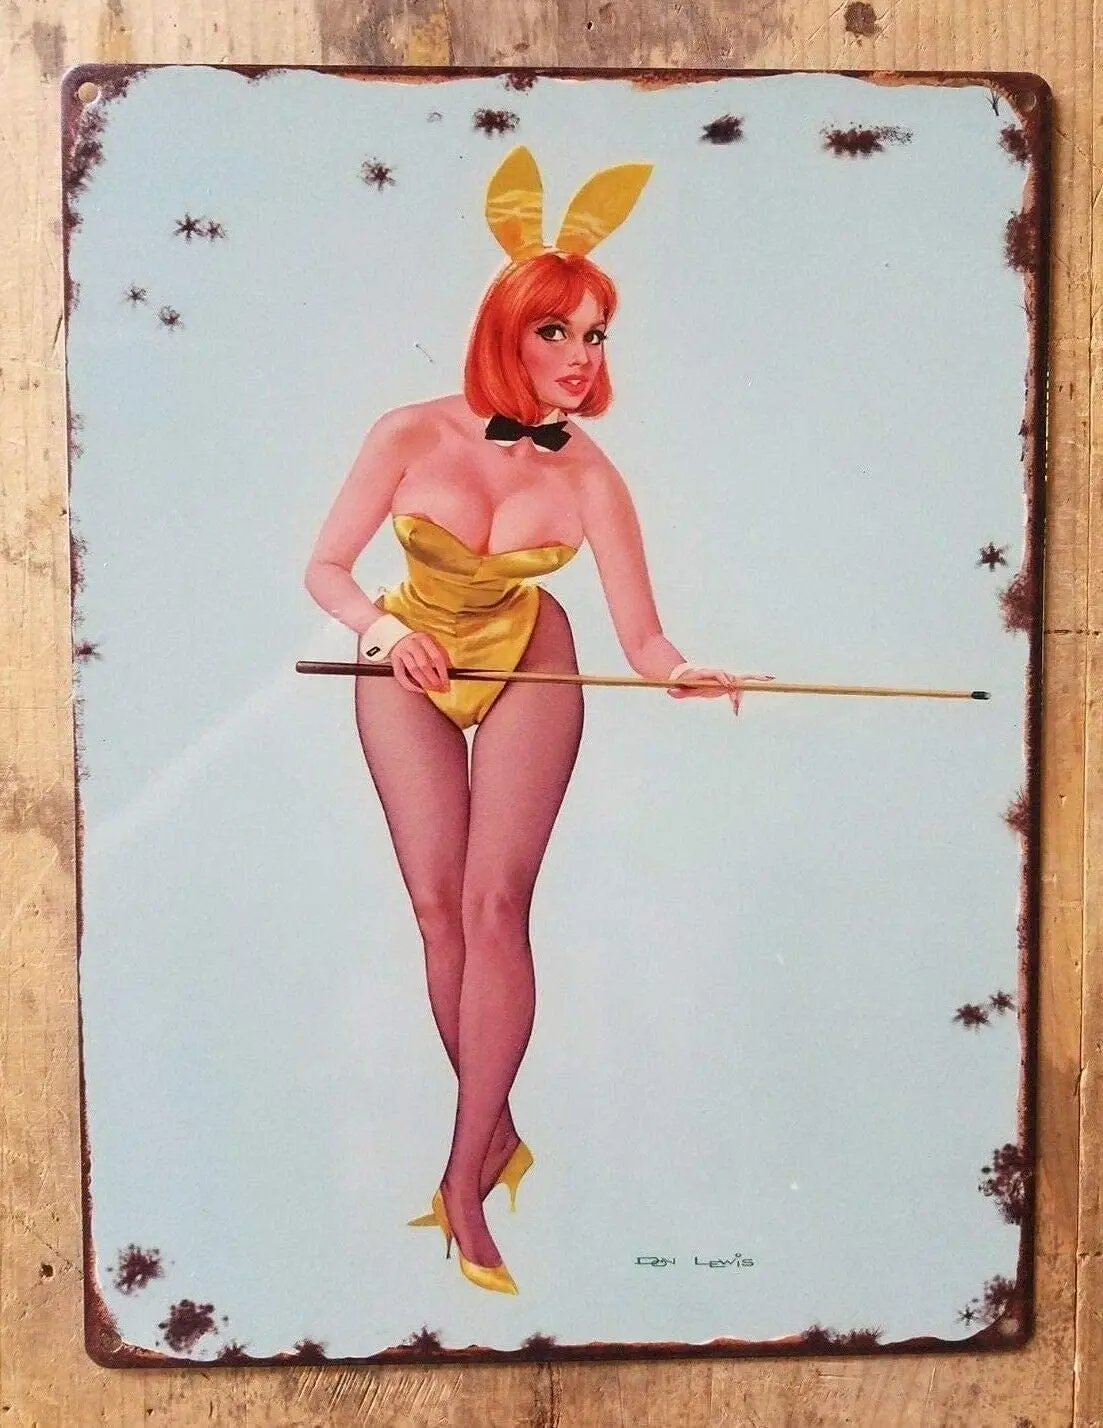 

Vintage Metal Tin Sign Pool Sexy Pin Up Girl for Home Bar Pub Kitchen Garage Restaurant Wall Deocr Plaque Signs 12x8 inch